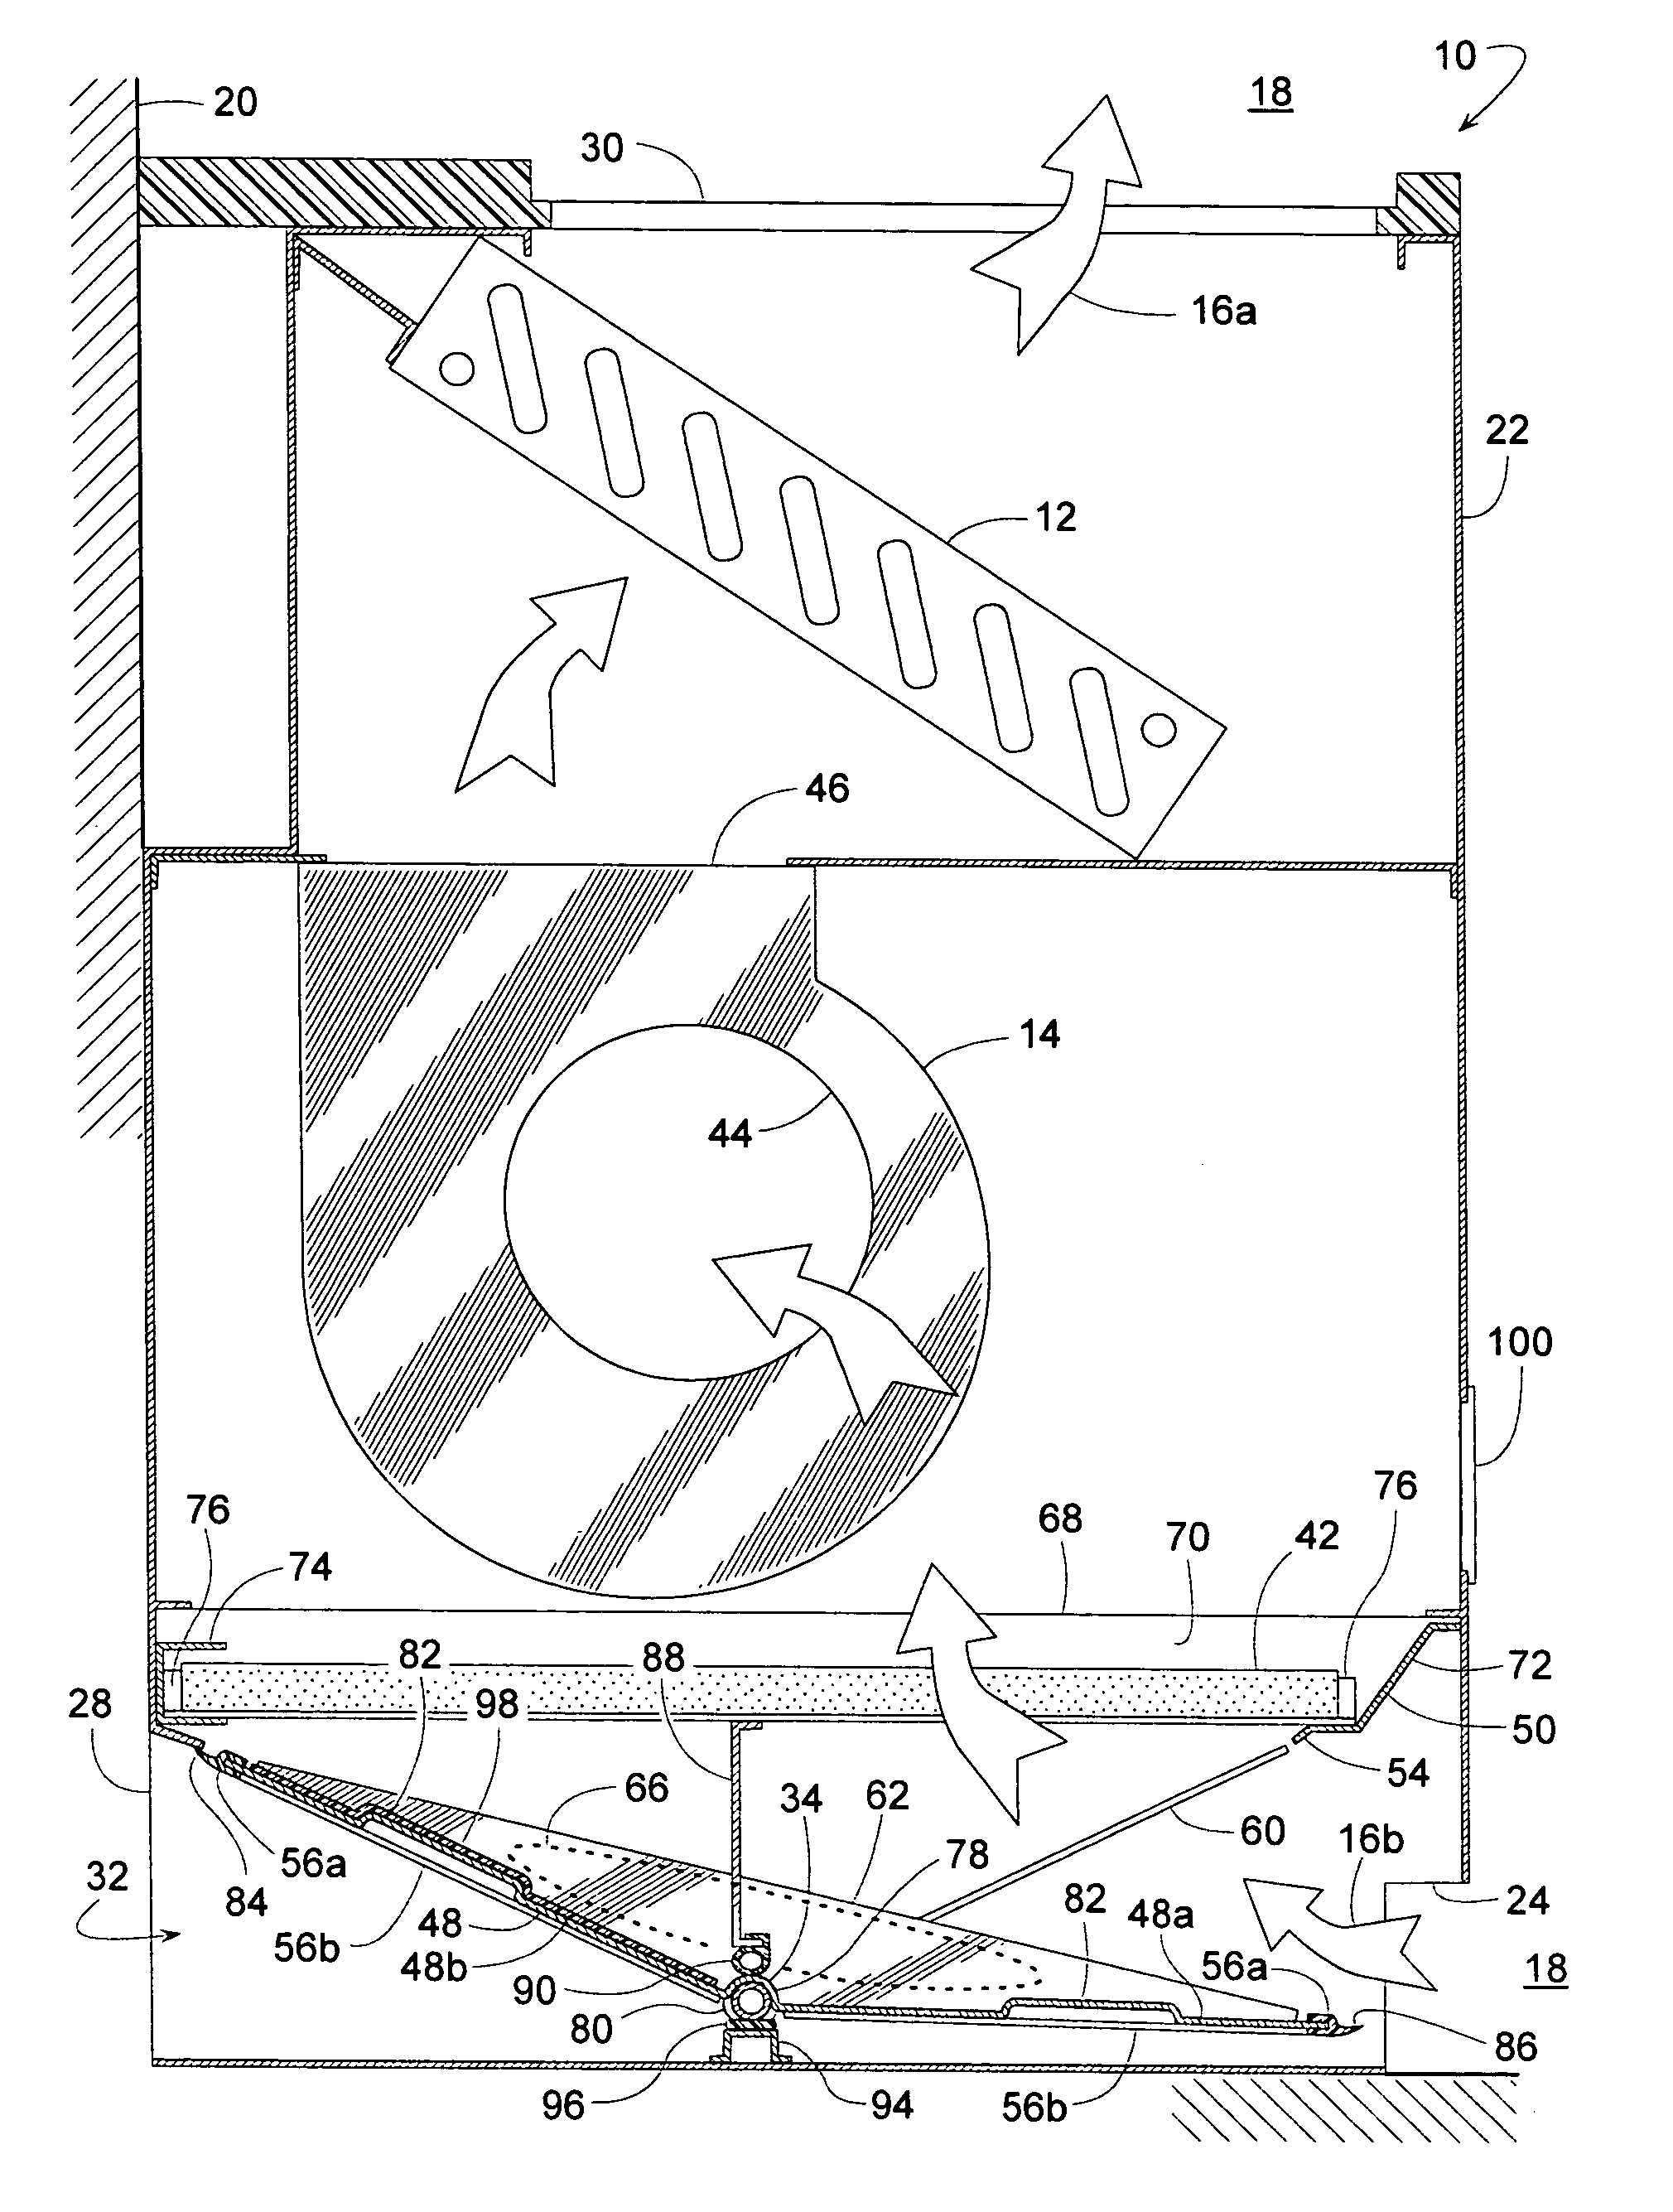 Unit ventilator having a splitter plate and a pivoting damper blade assembly